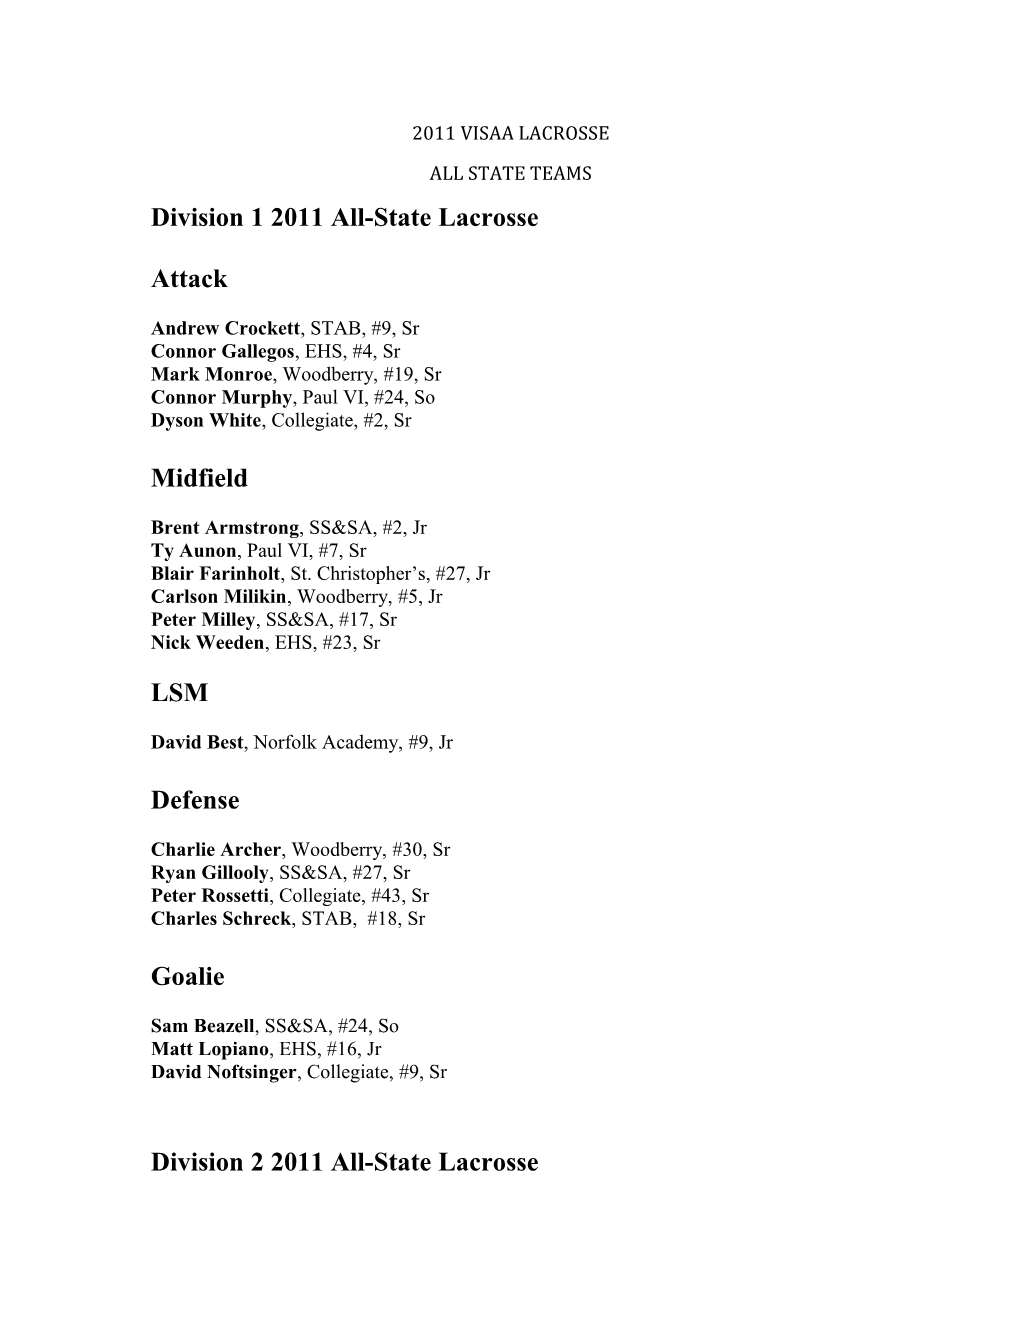 Division 1 2011 All-State Lacrosse